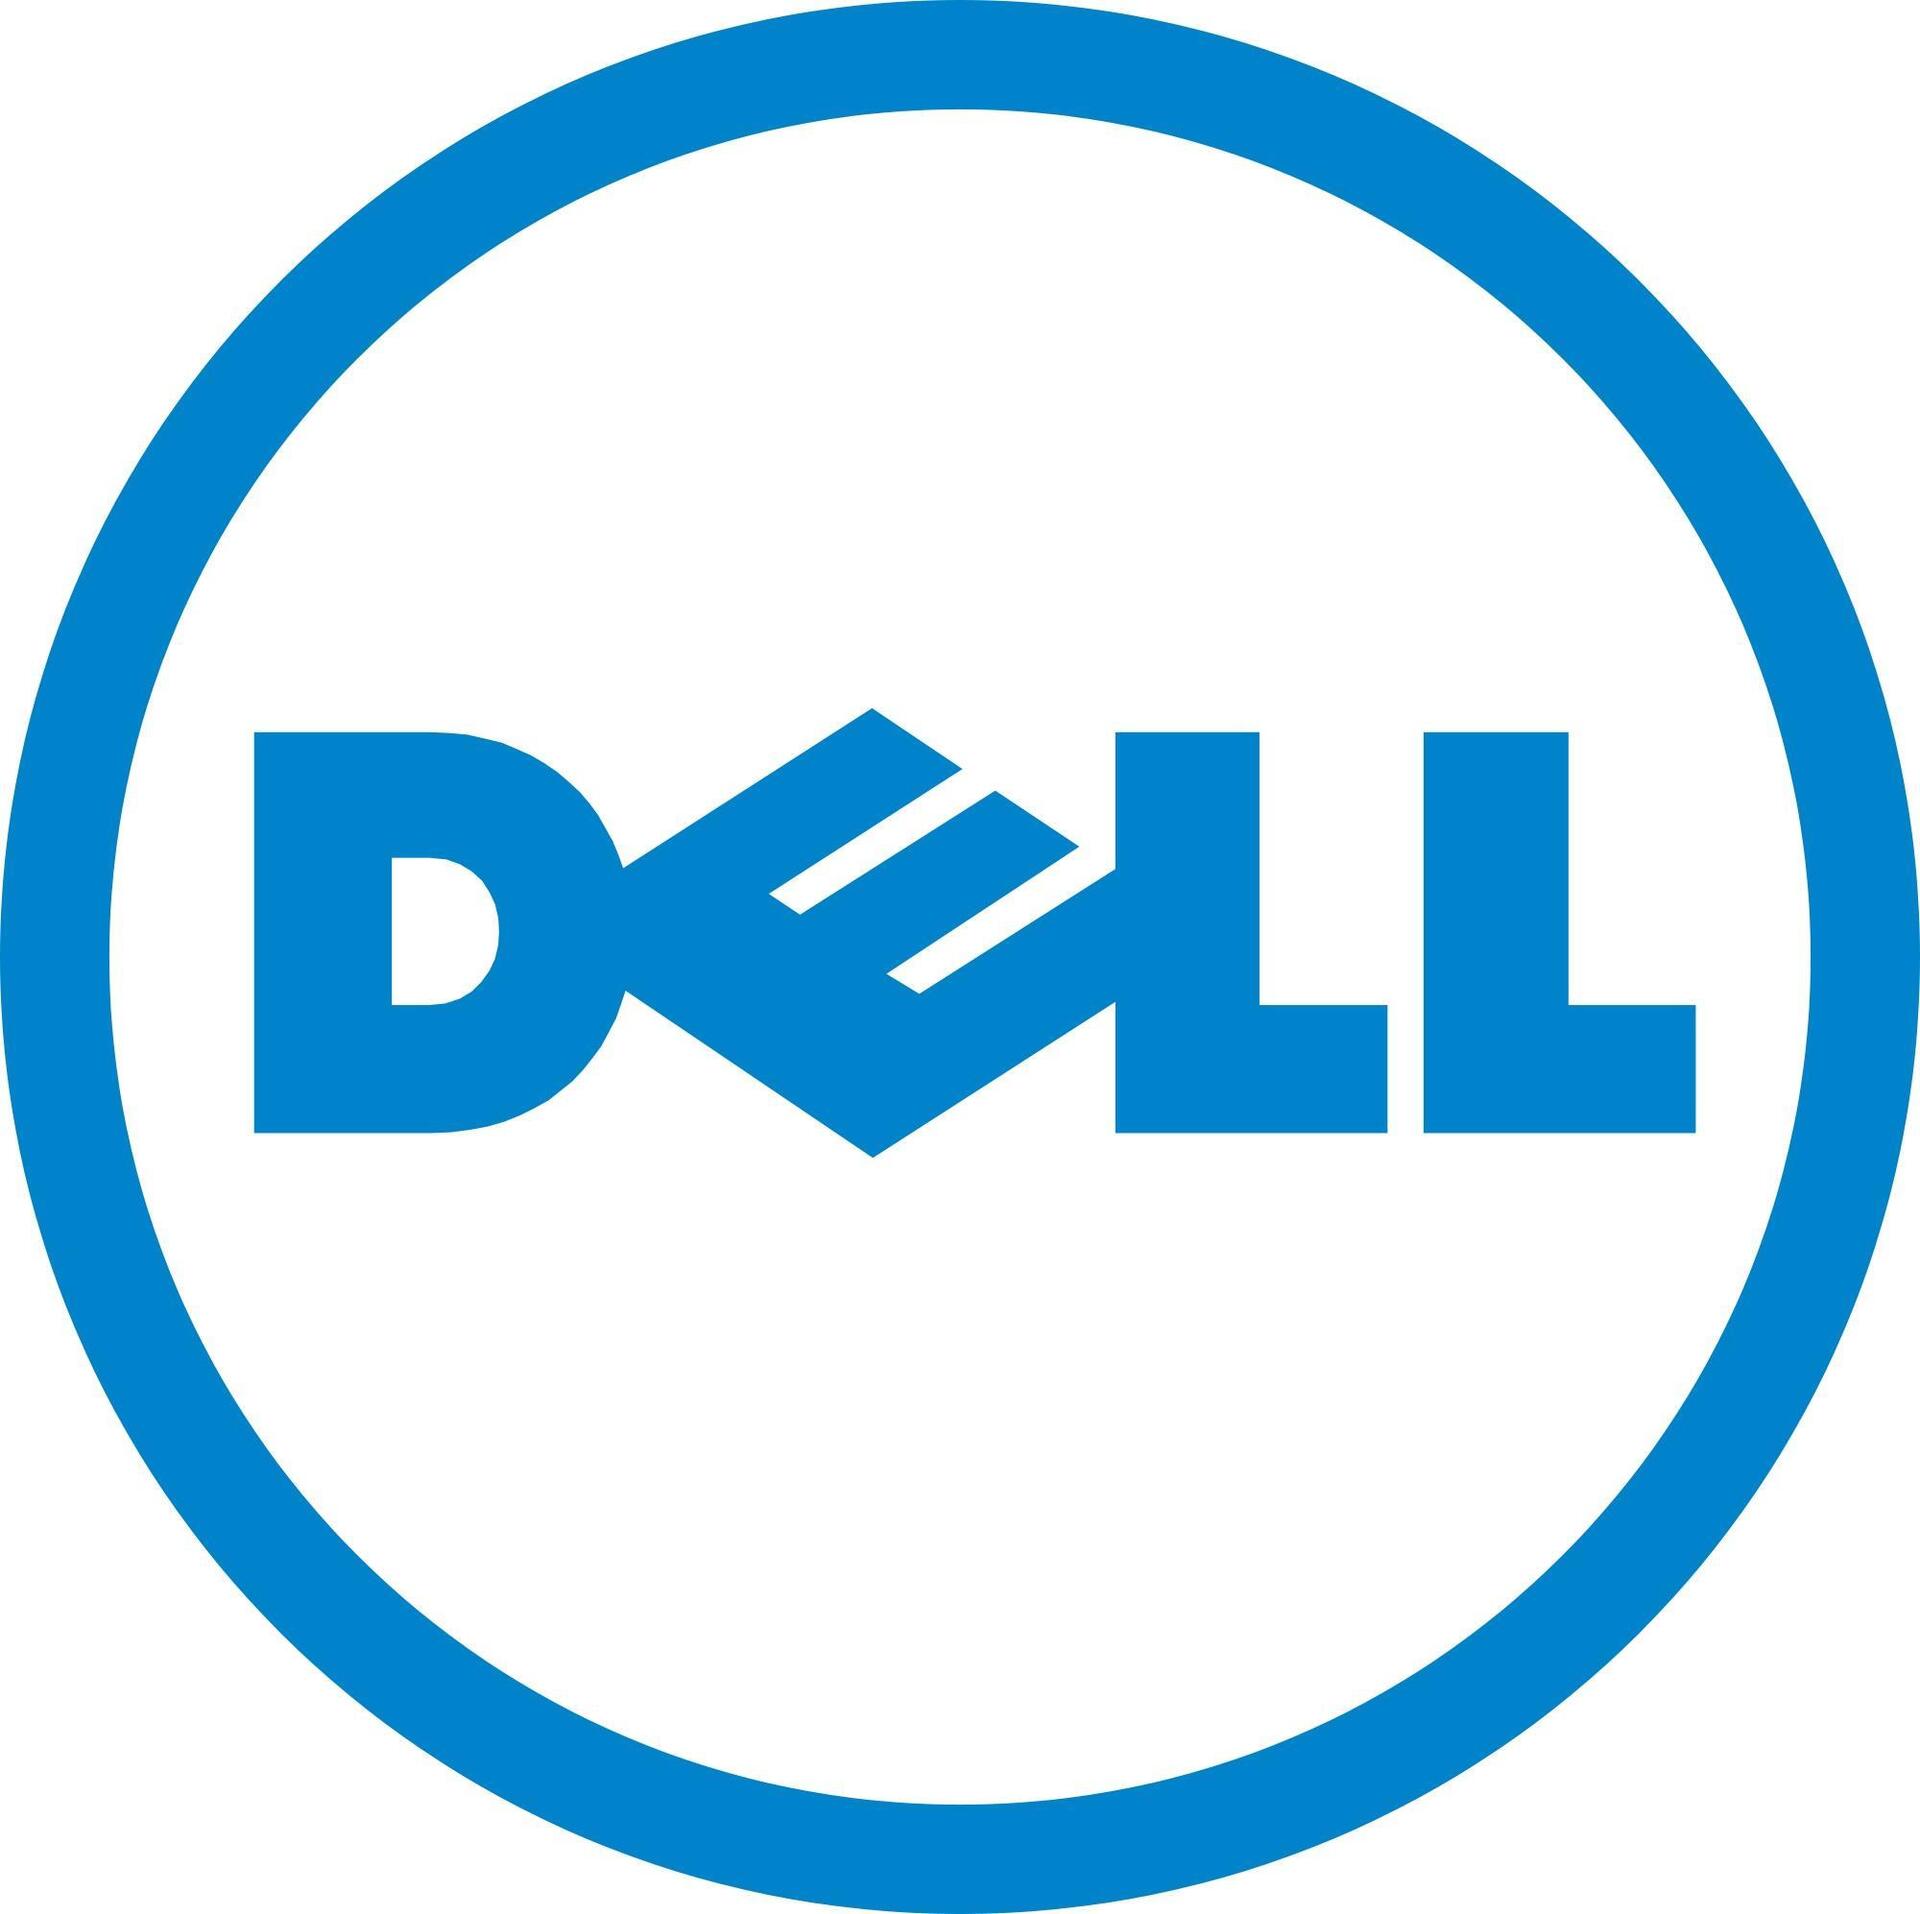 DELL 3 Year Gold Hardware Maintenance by Avocent for the Dell DMPU108E